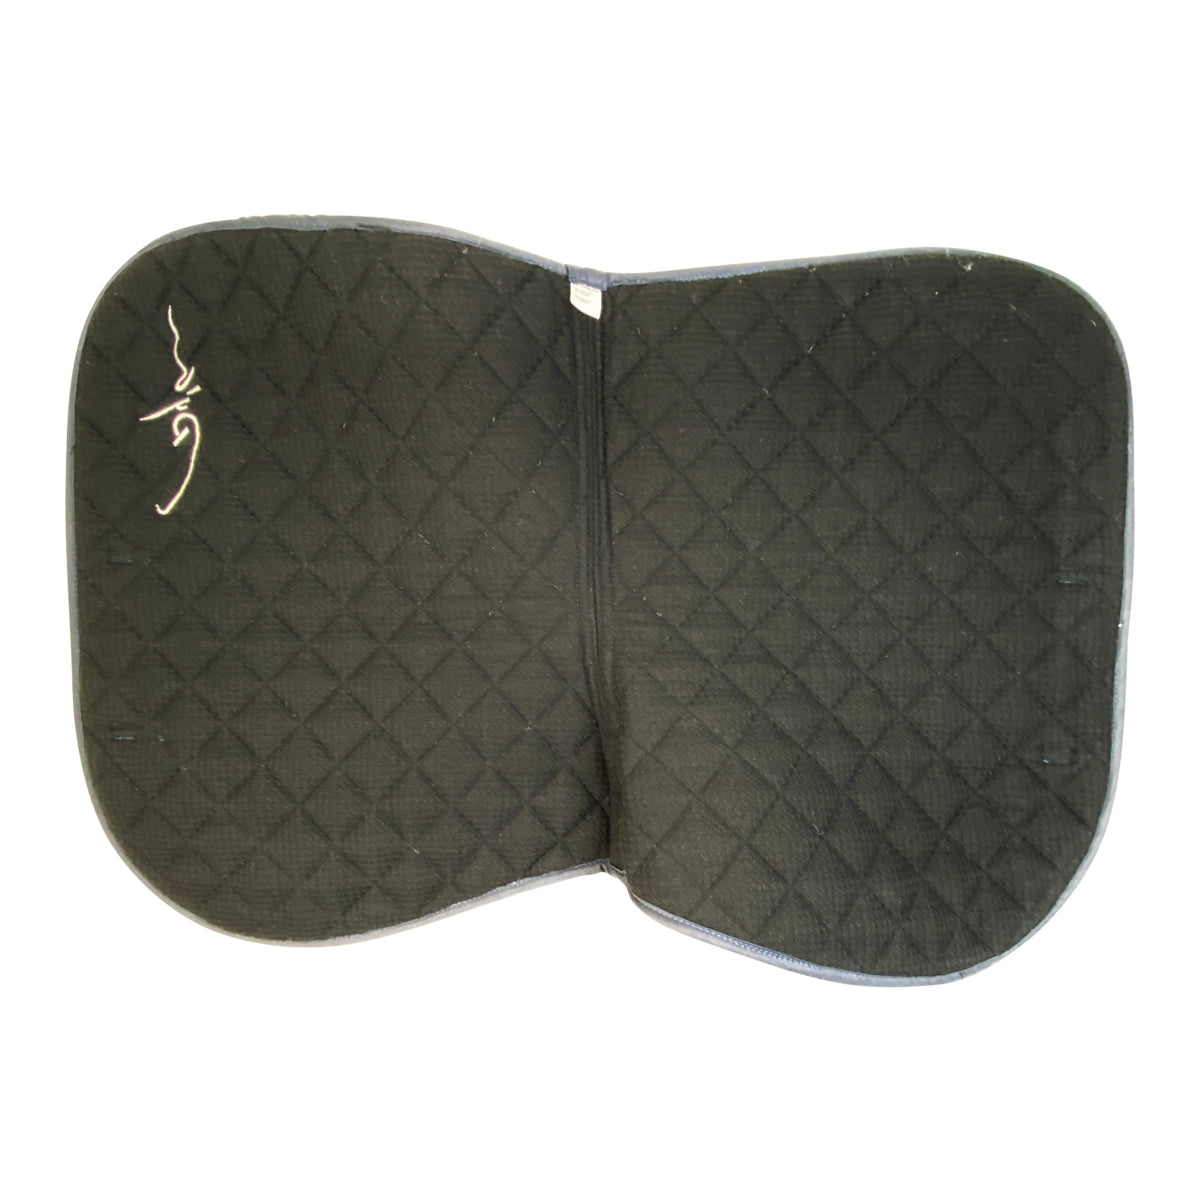 Dy&#39;on Saddle Pad in Navy